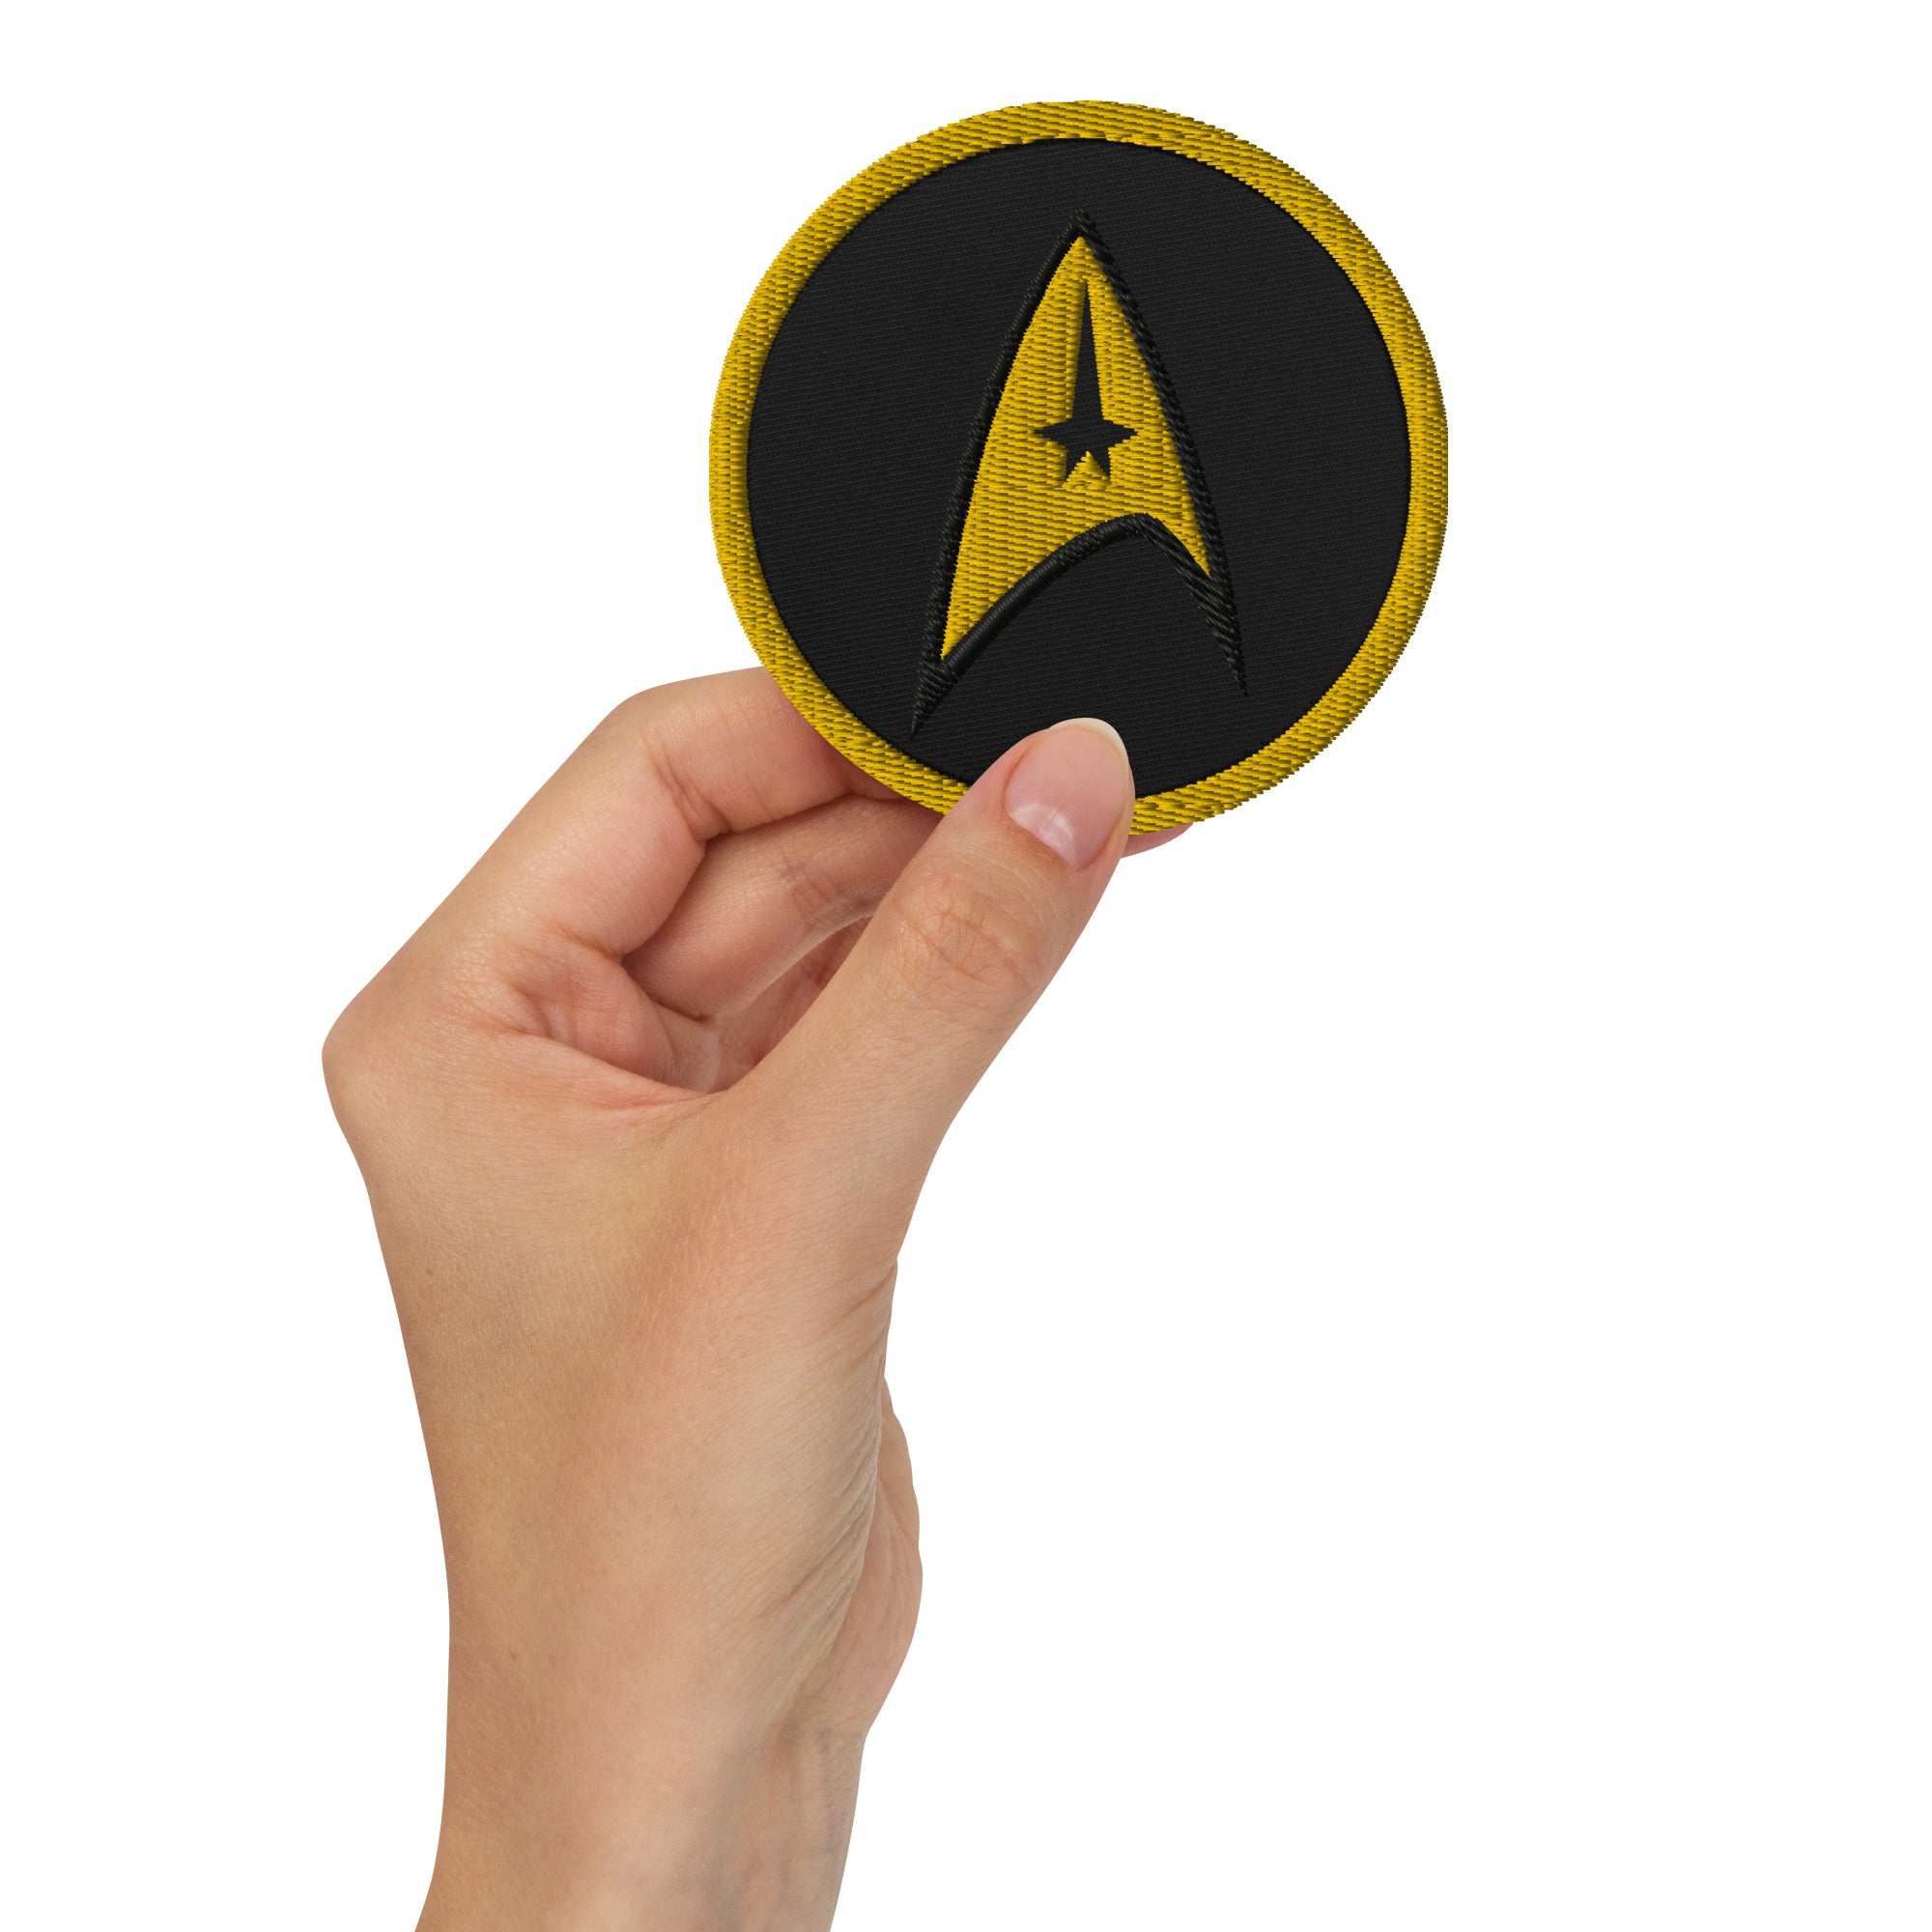 The Delta Insignia Starfleet Badge Embroidered Patch Star Trek Style Cosplay - Edge of Life Designs